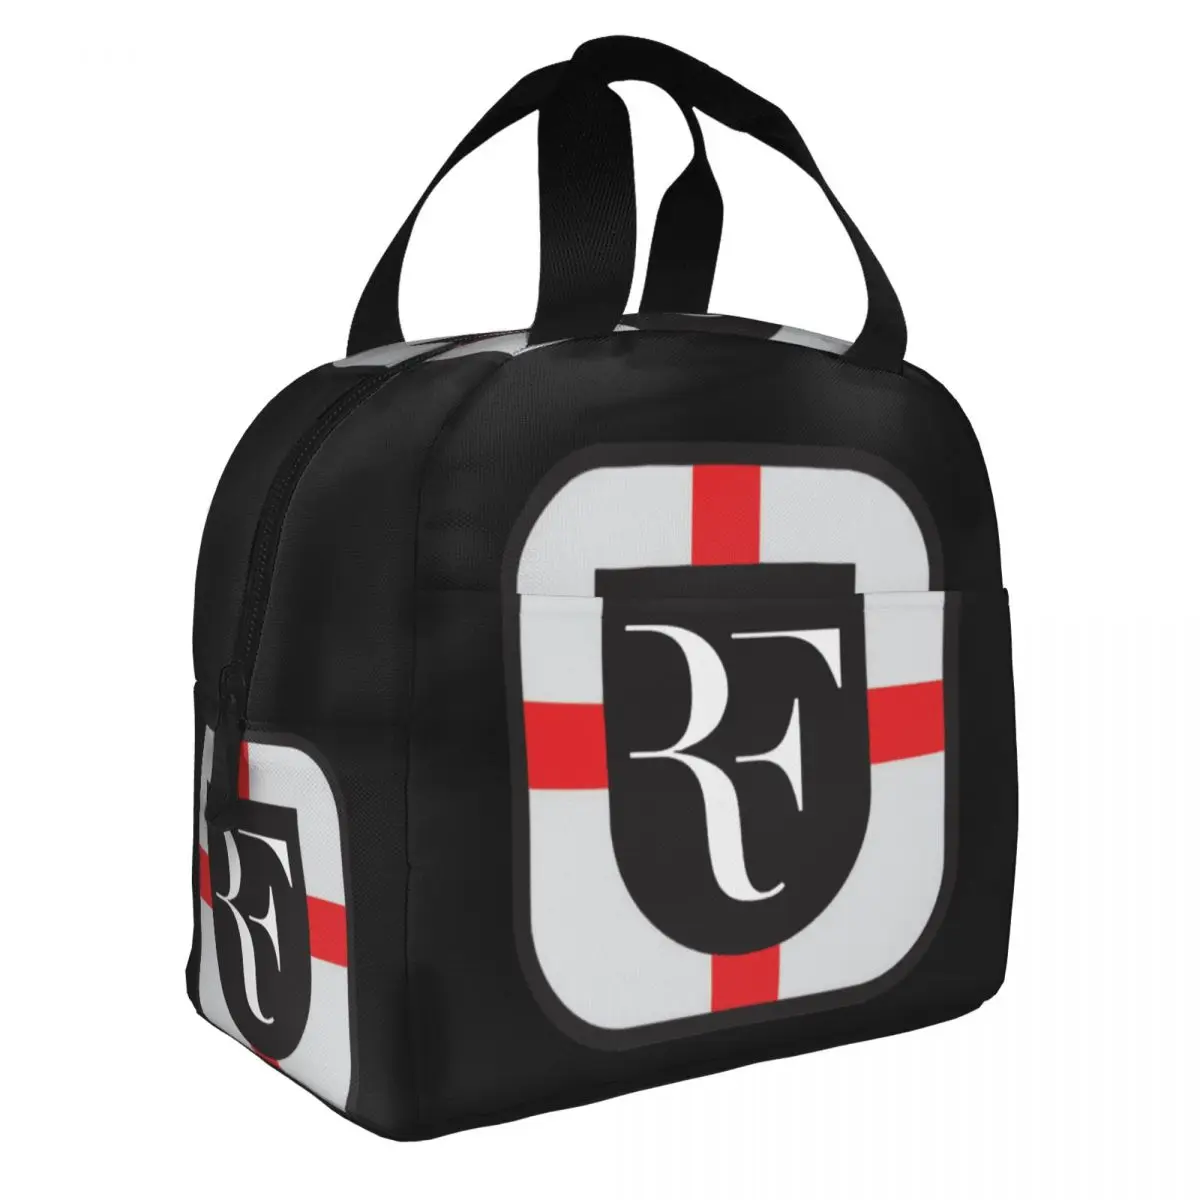 Roger Federer Logo Lunch Bento Bags Portable Aluminum Foil thickened Thermal Cloth Lunch Bag for Women Men Boy